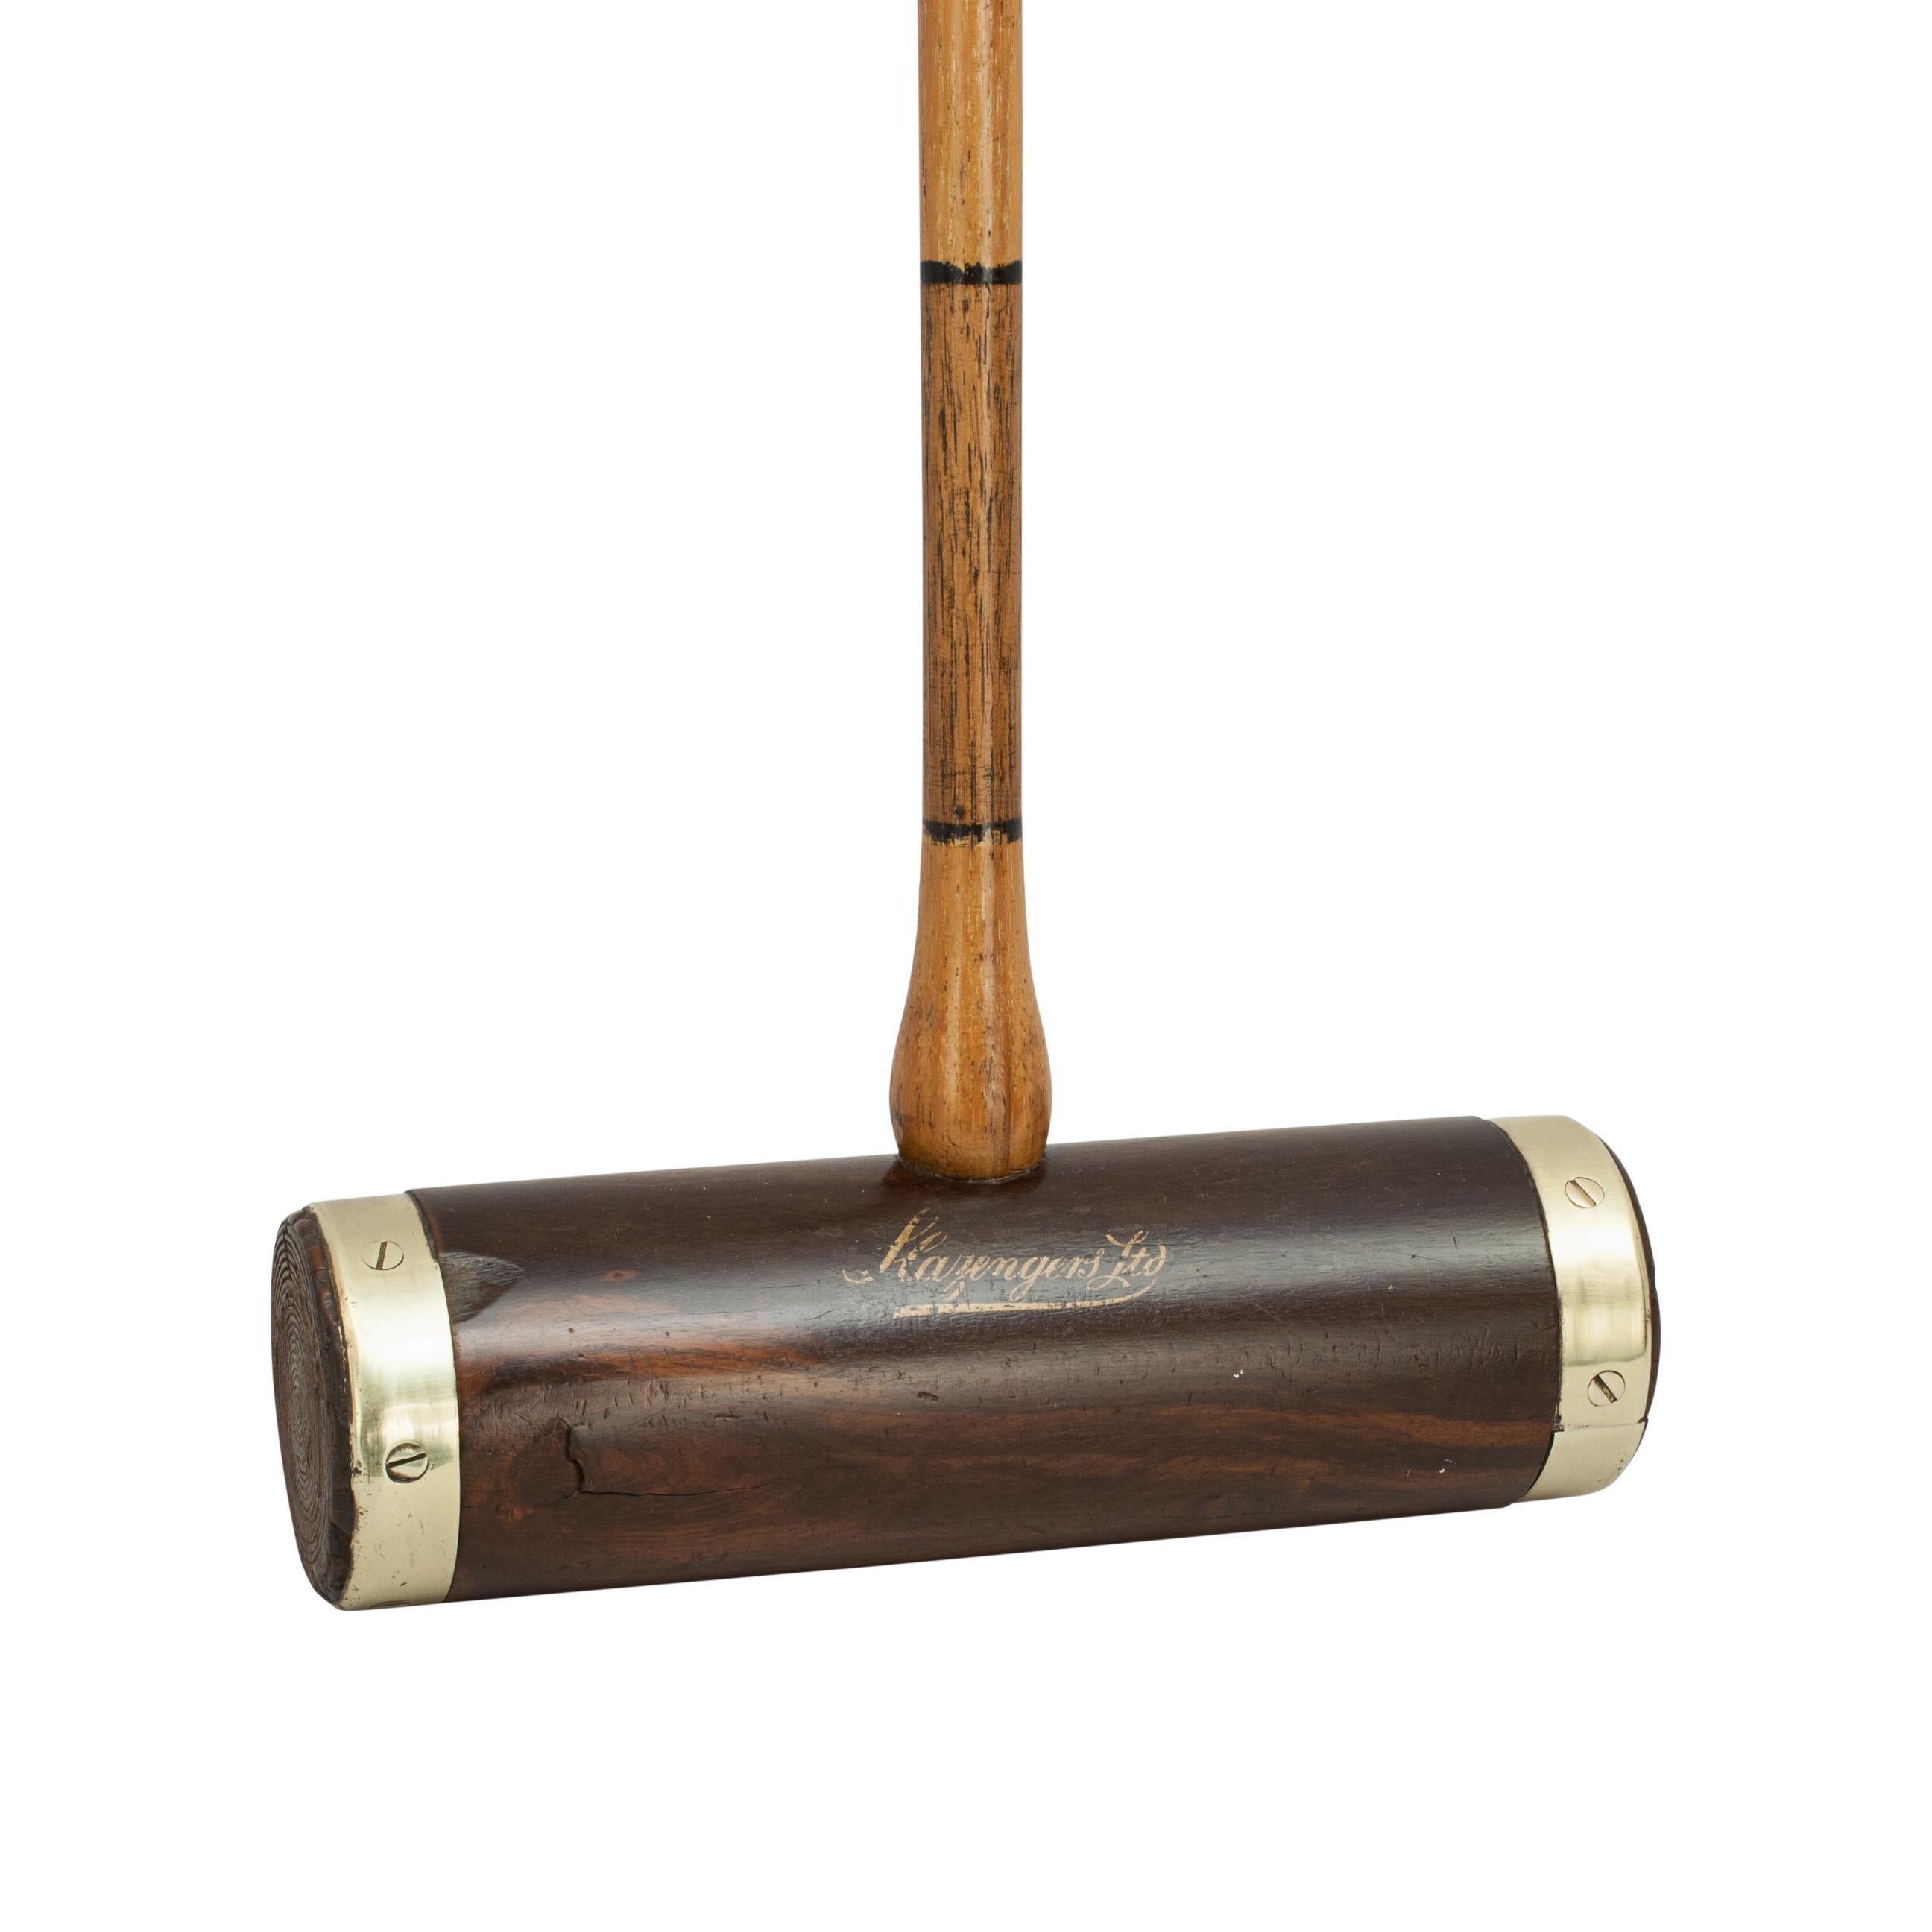 Antique Slazenger 'Corbally' croquet mallet.
A brass bound croquet mallet by Slazenger with a Lignum Vitae head. The mallet head has 'Slazengers Ltd' and 'The Corbally' written in gold on the side and it is fitted with an octagonal scored and